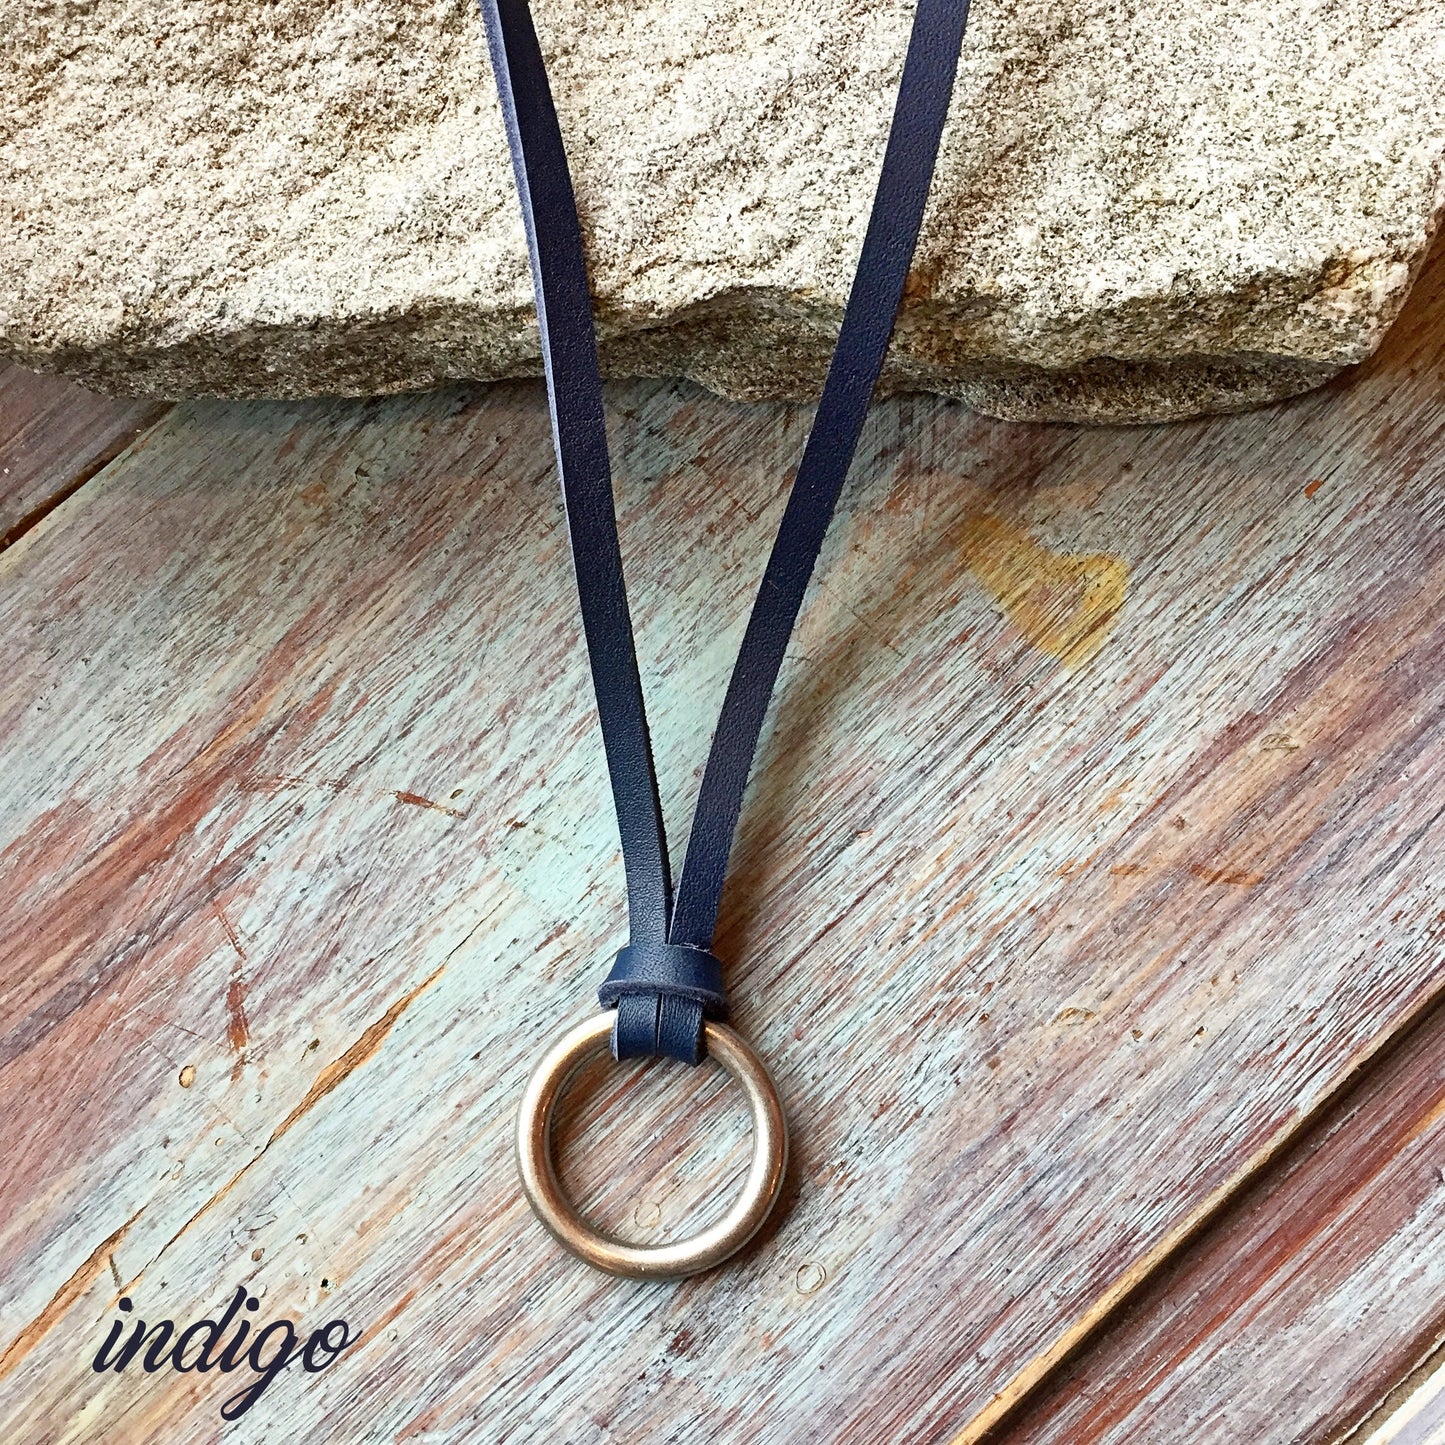 Leather and Silver Necklace | Leather Necklace for Women | Leather Jewelry for Women | Anniversary Gift